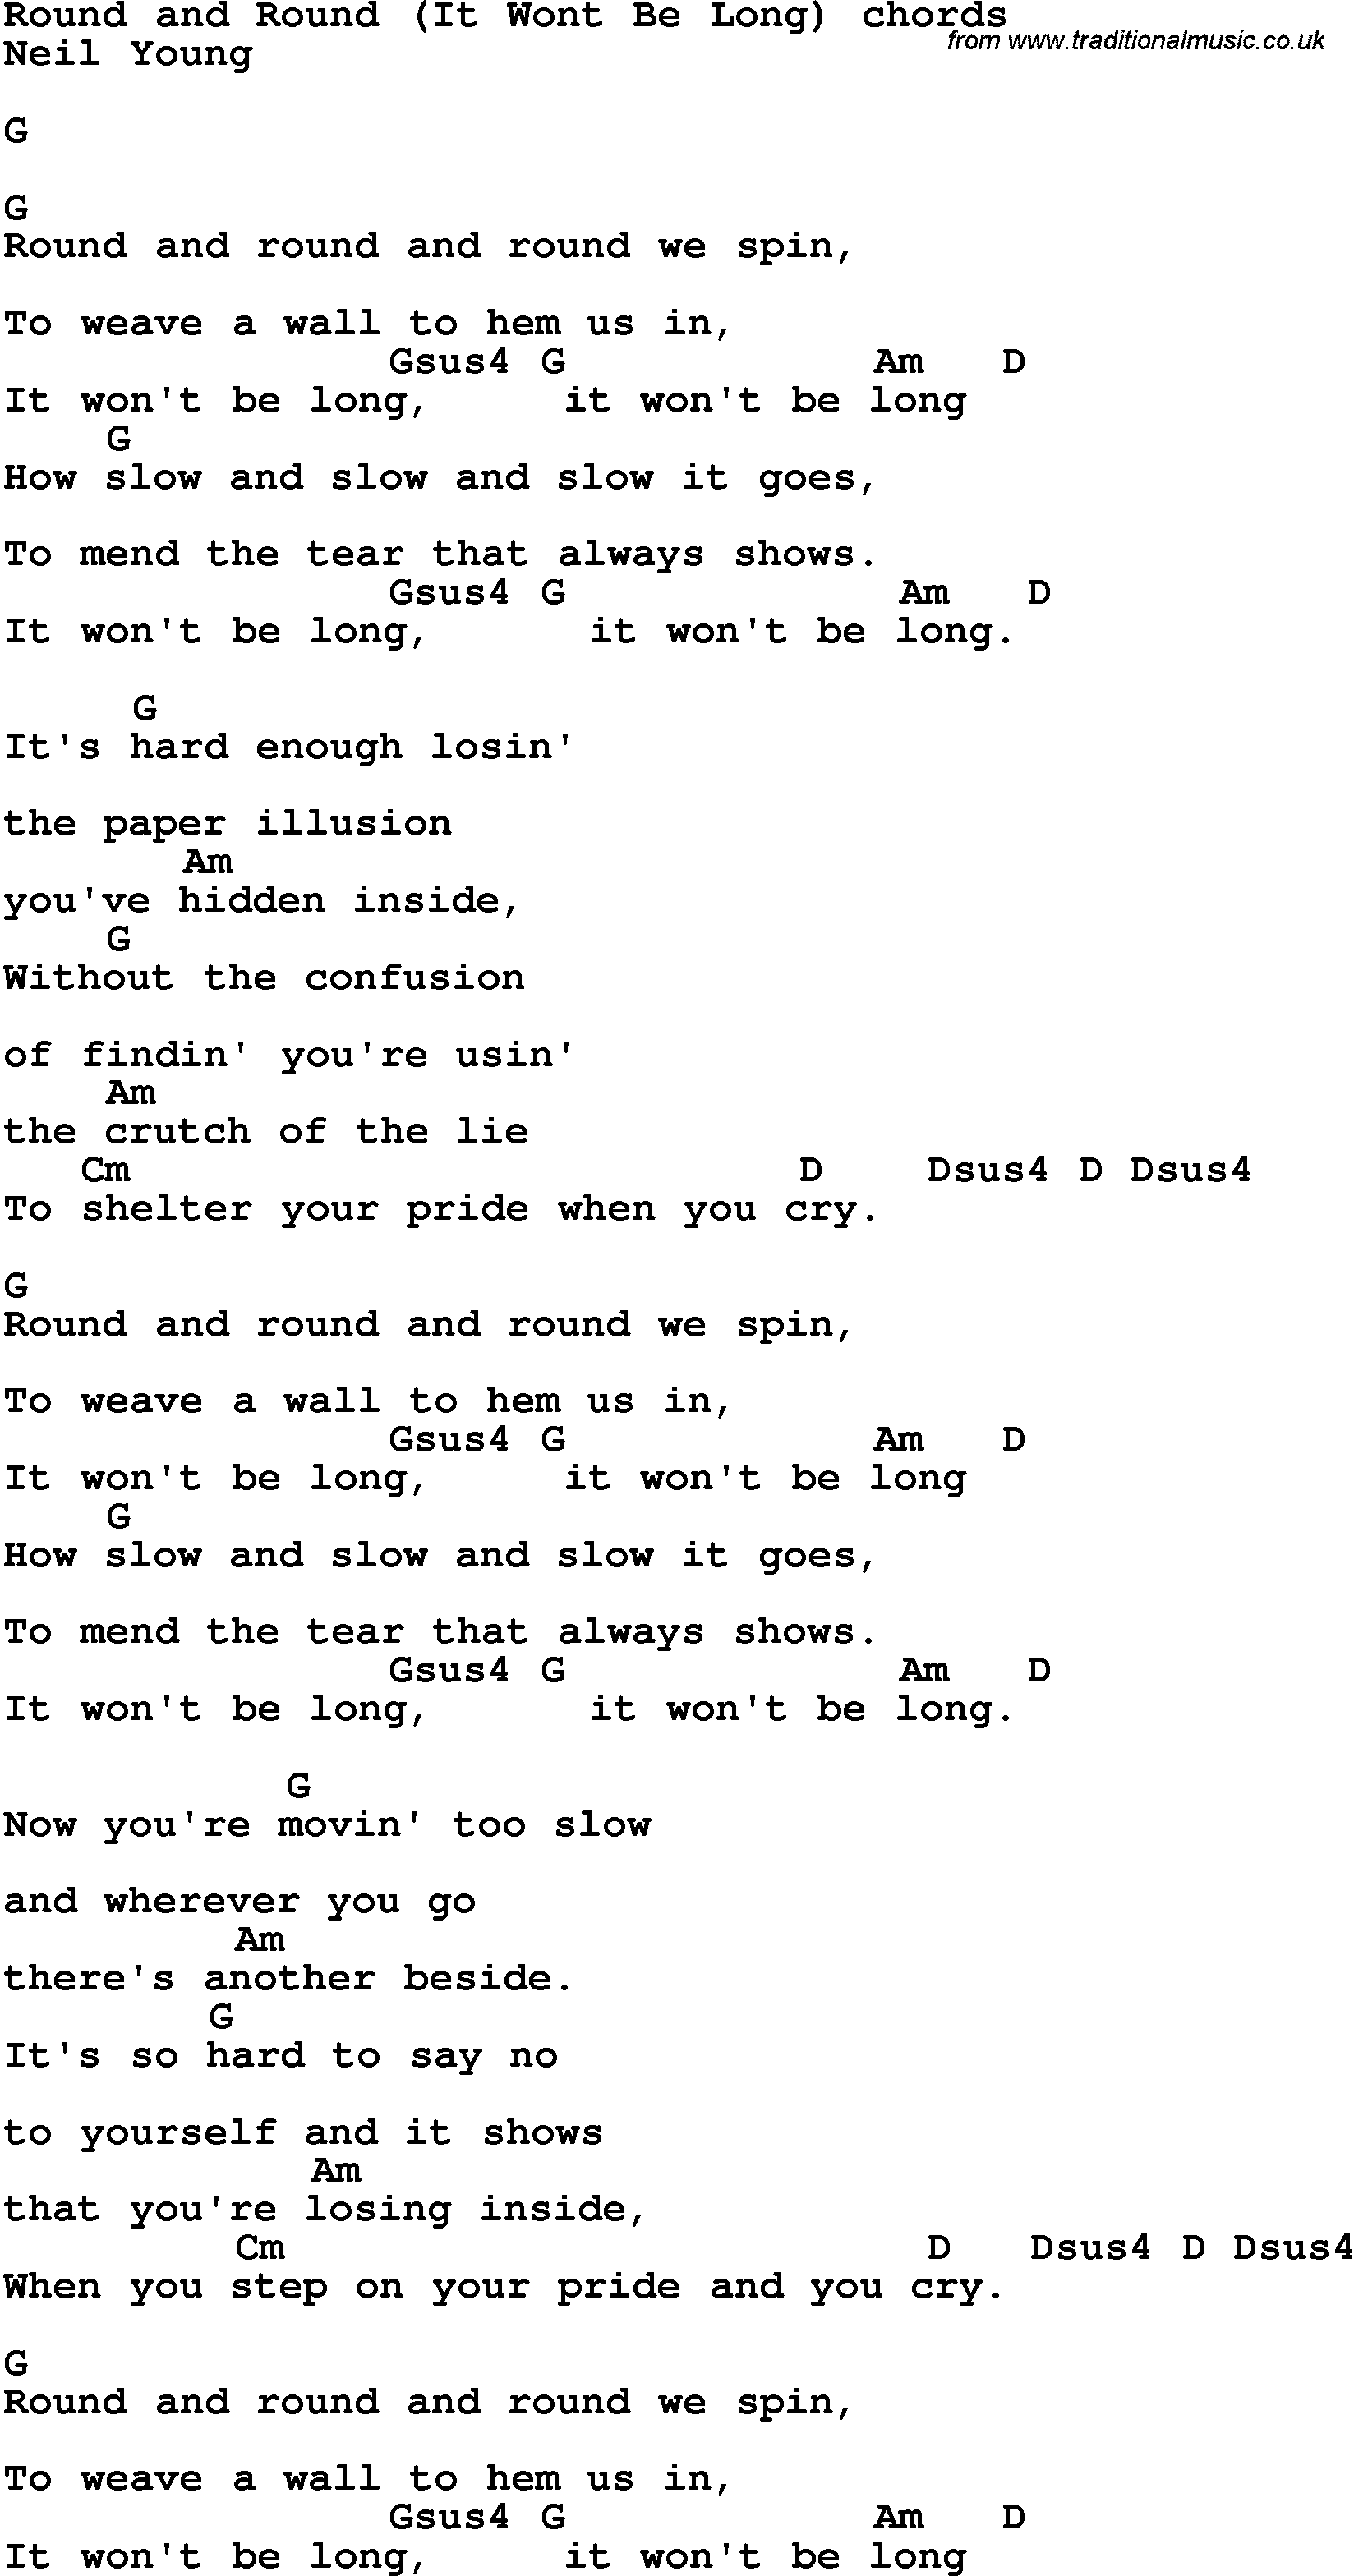 Song Lyrics with guitar chords for Round And Round - Neil Young